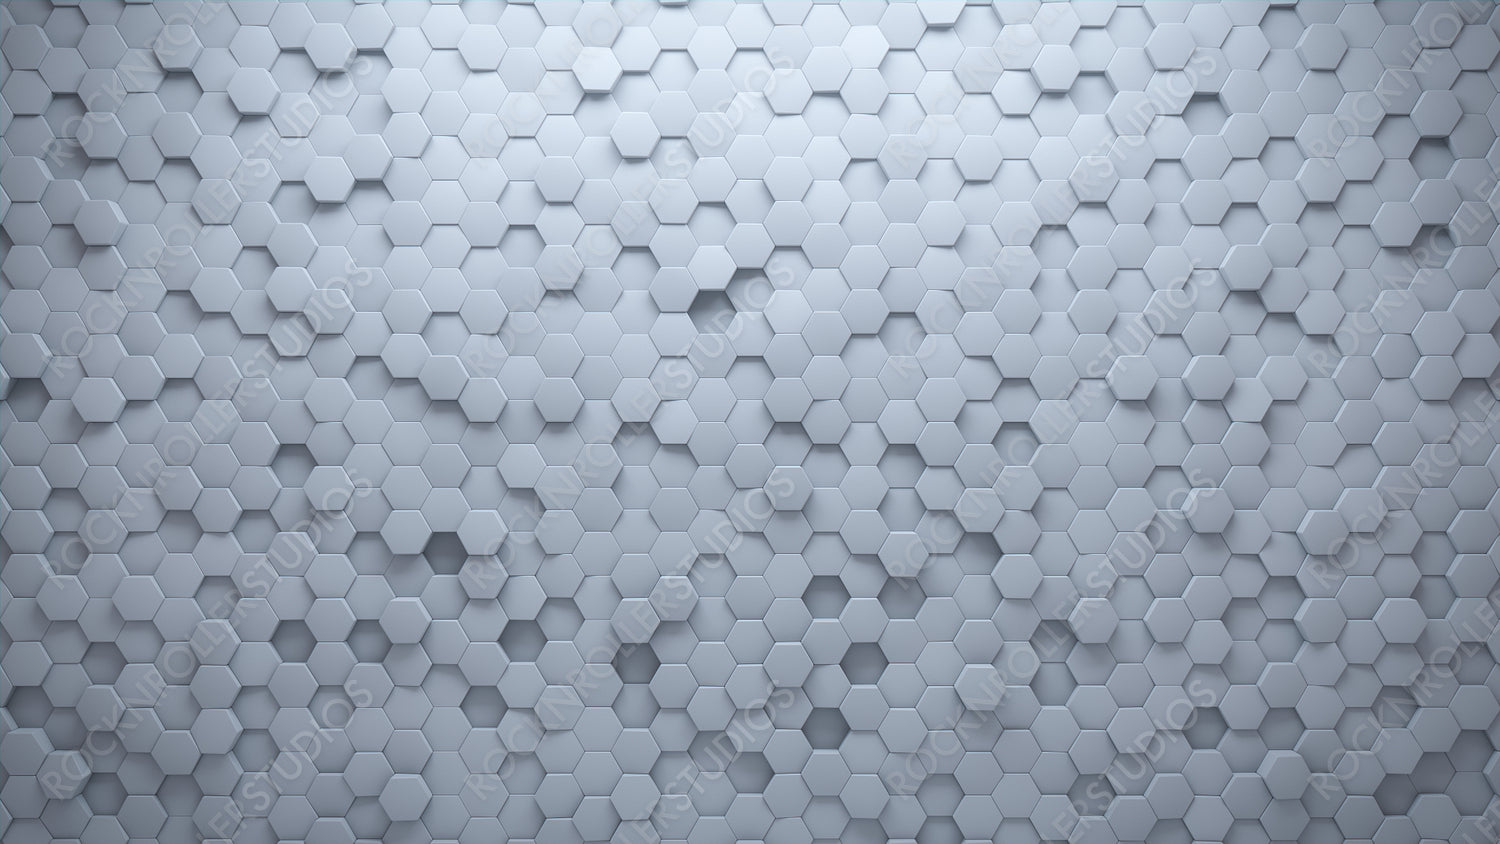 3D Tiles arranged to create a White wall. Semigloss, Hexagonal Background formed from Futuristic blocks. 3D Render